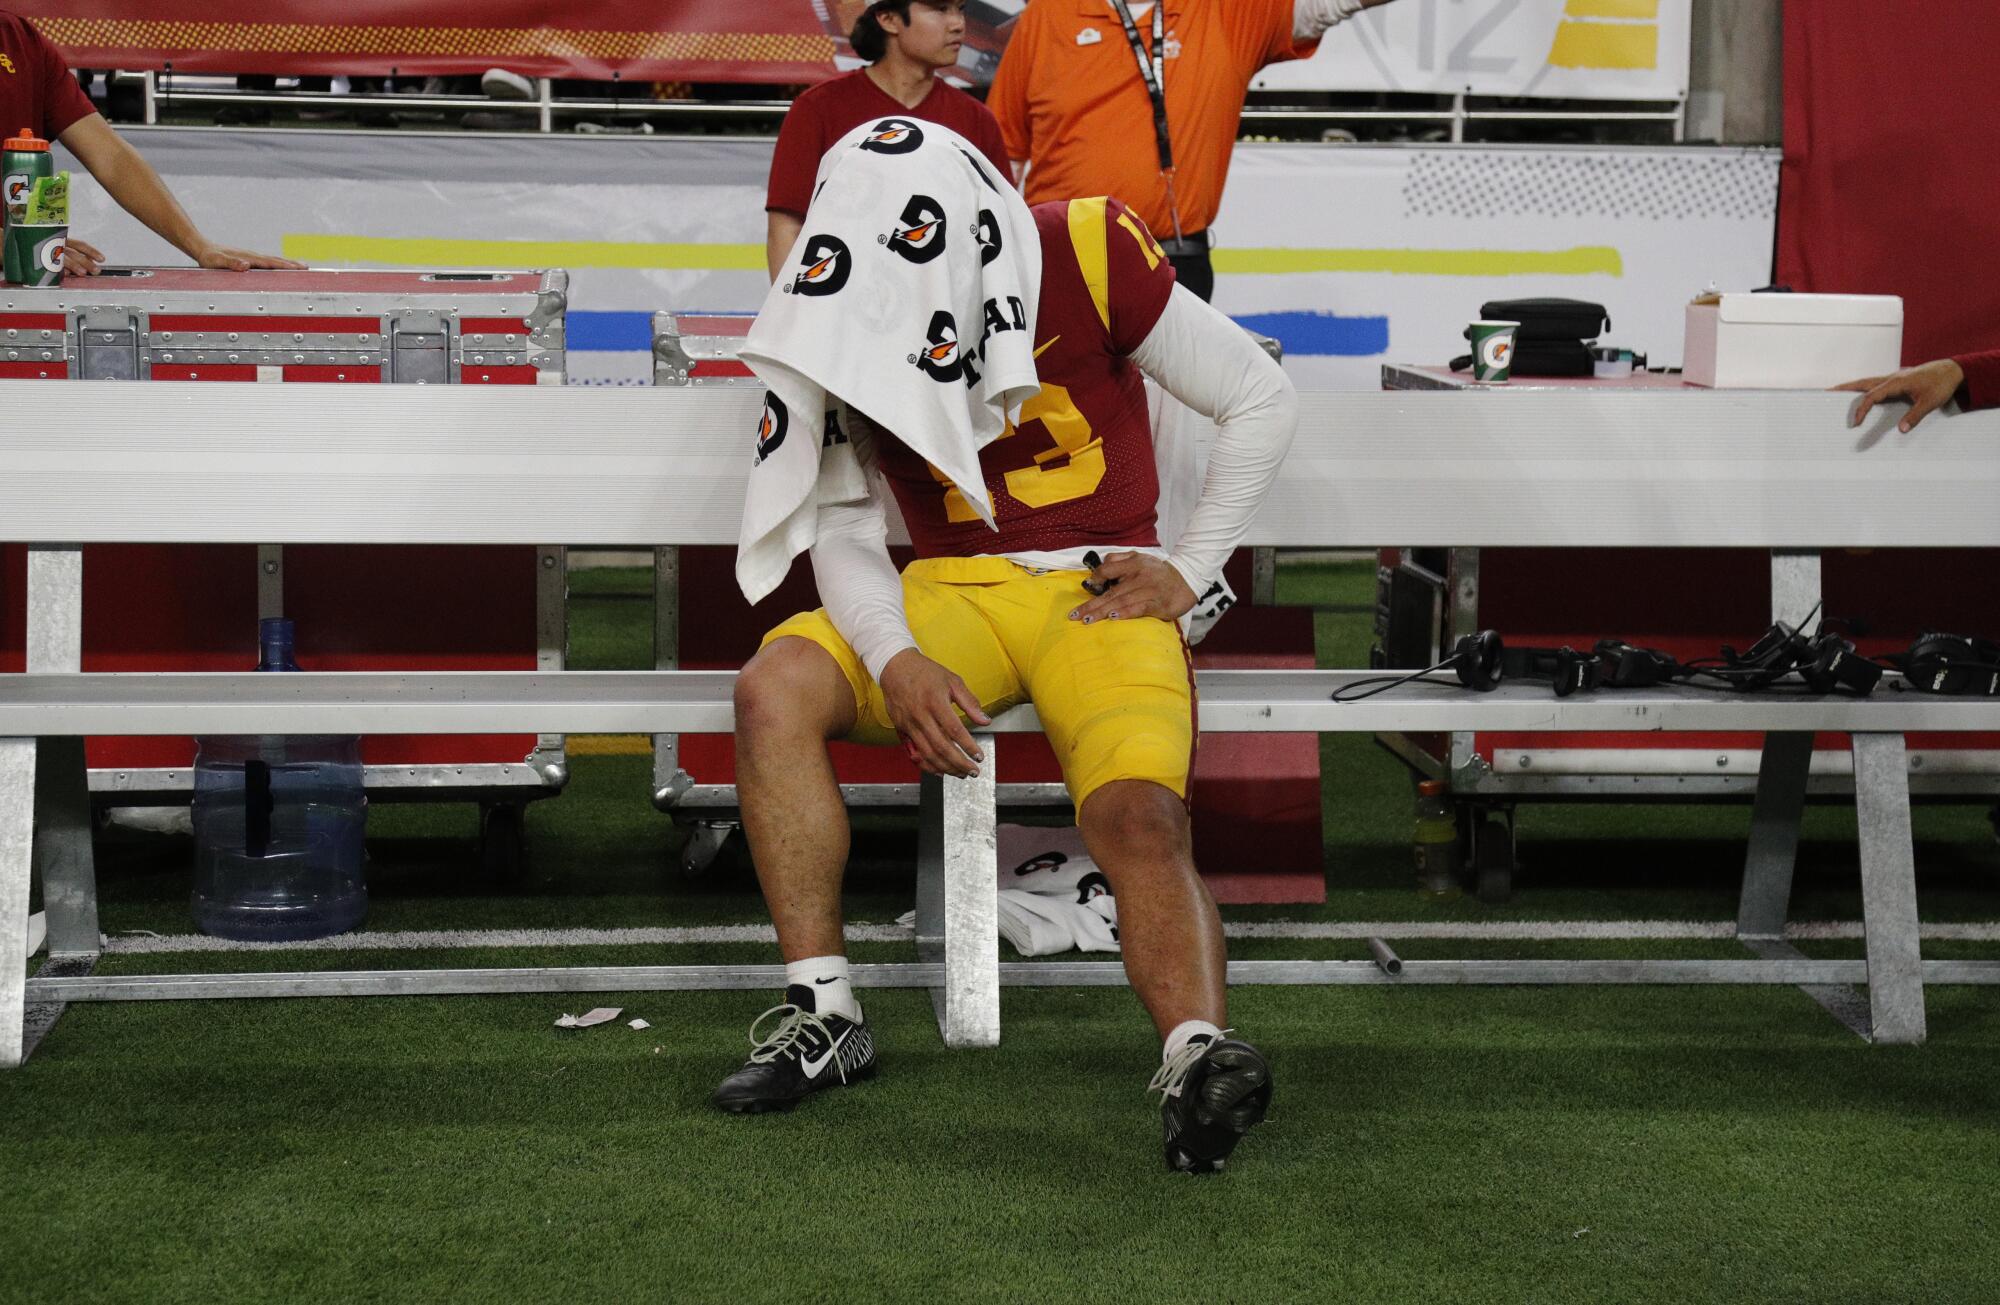 USC quarterback Caleb Williams sits under a towel after the Trojans lost to Utah in the Pac-12 championship game